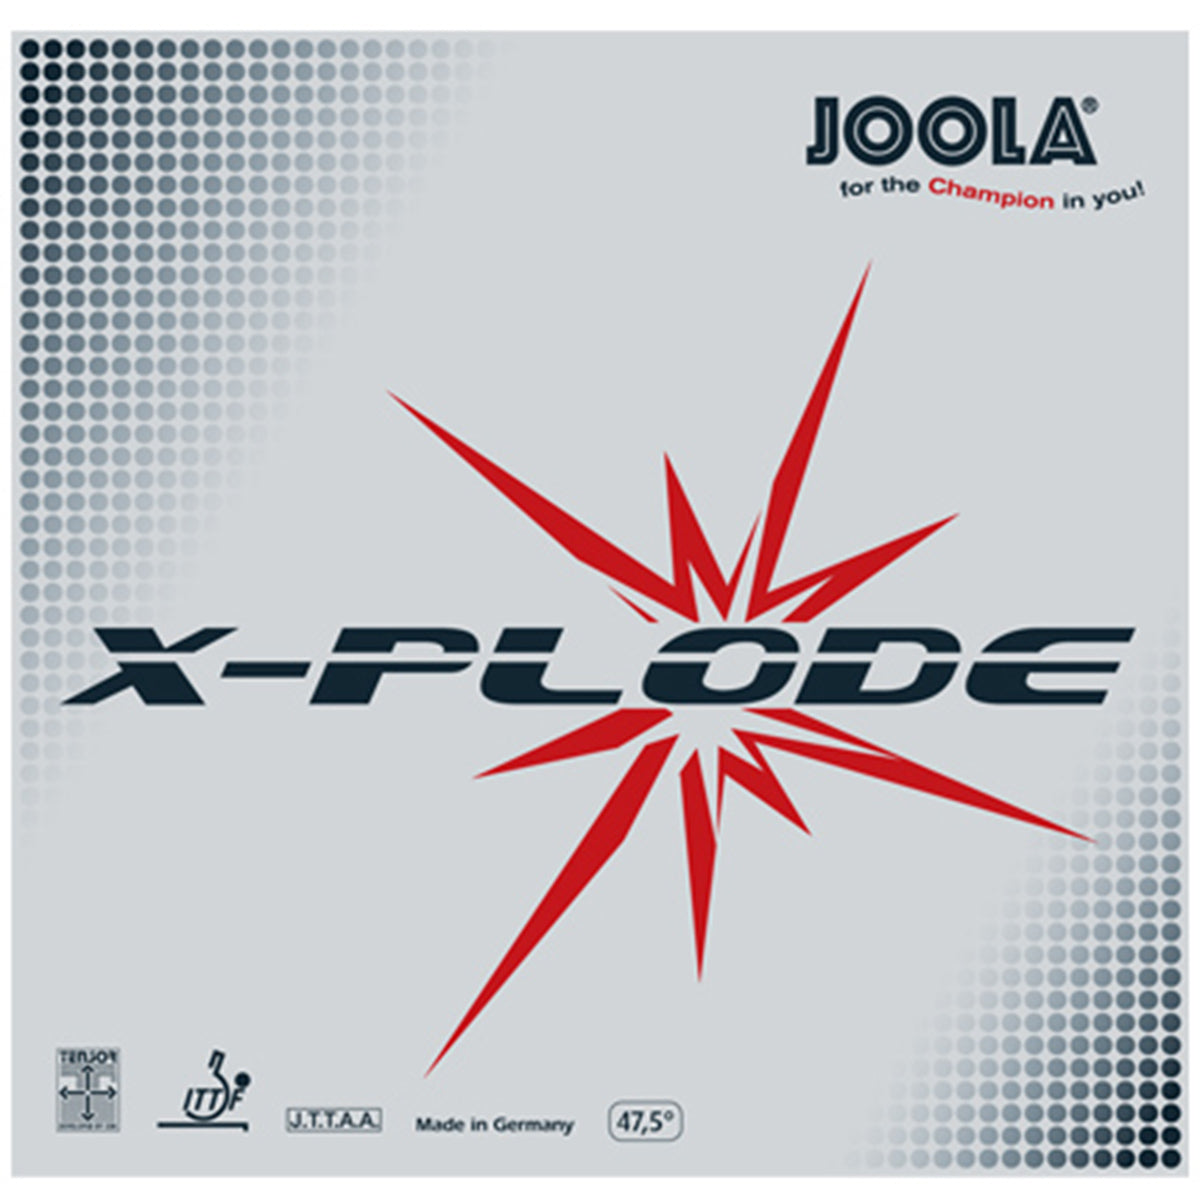 Joola X-plode Table Tennis Rubber - Red Max